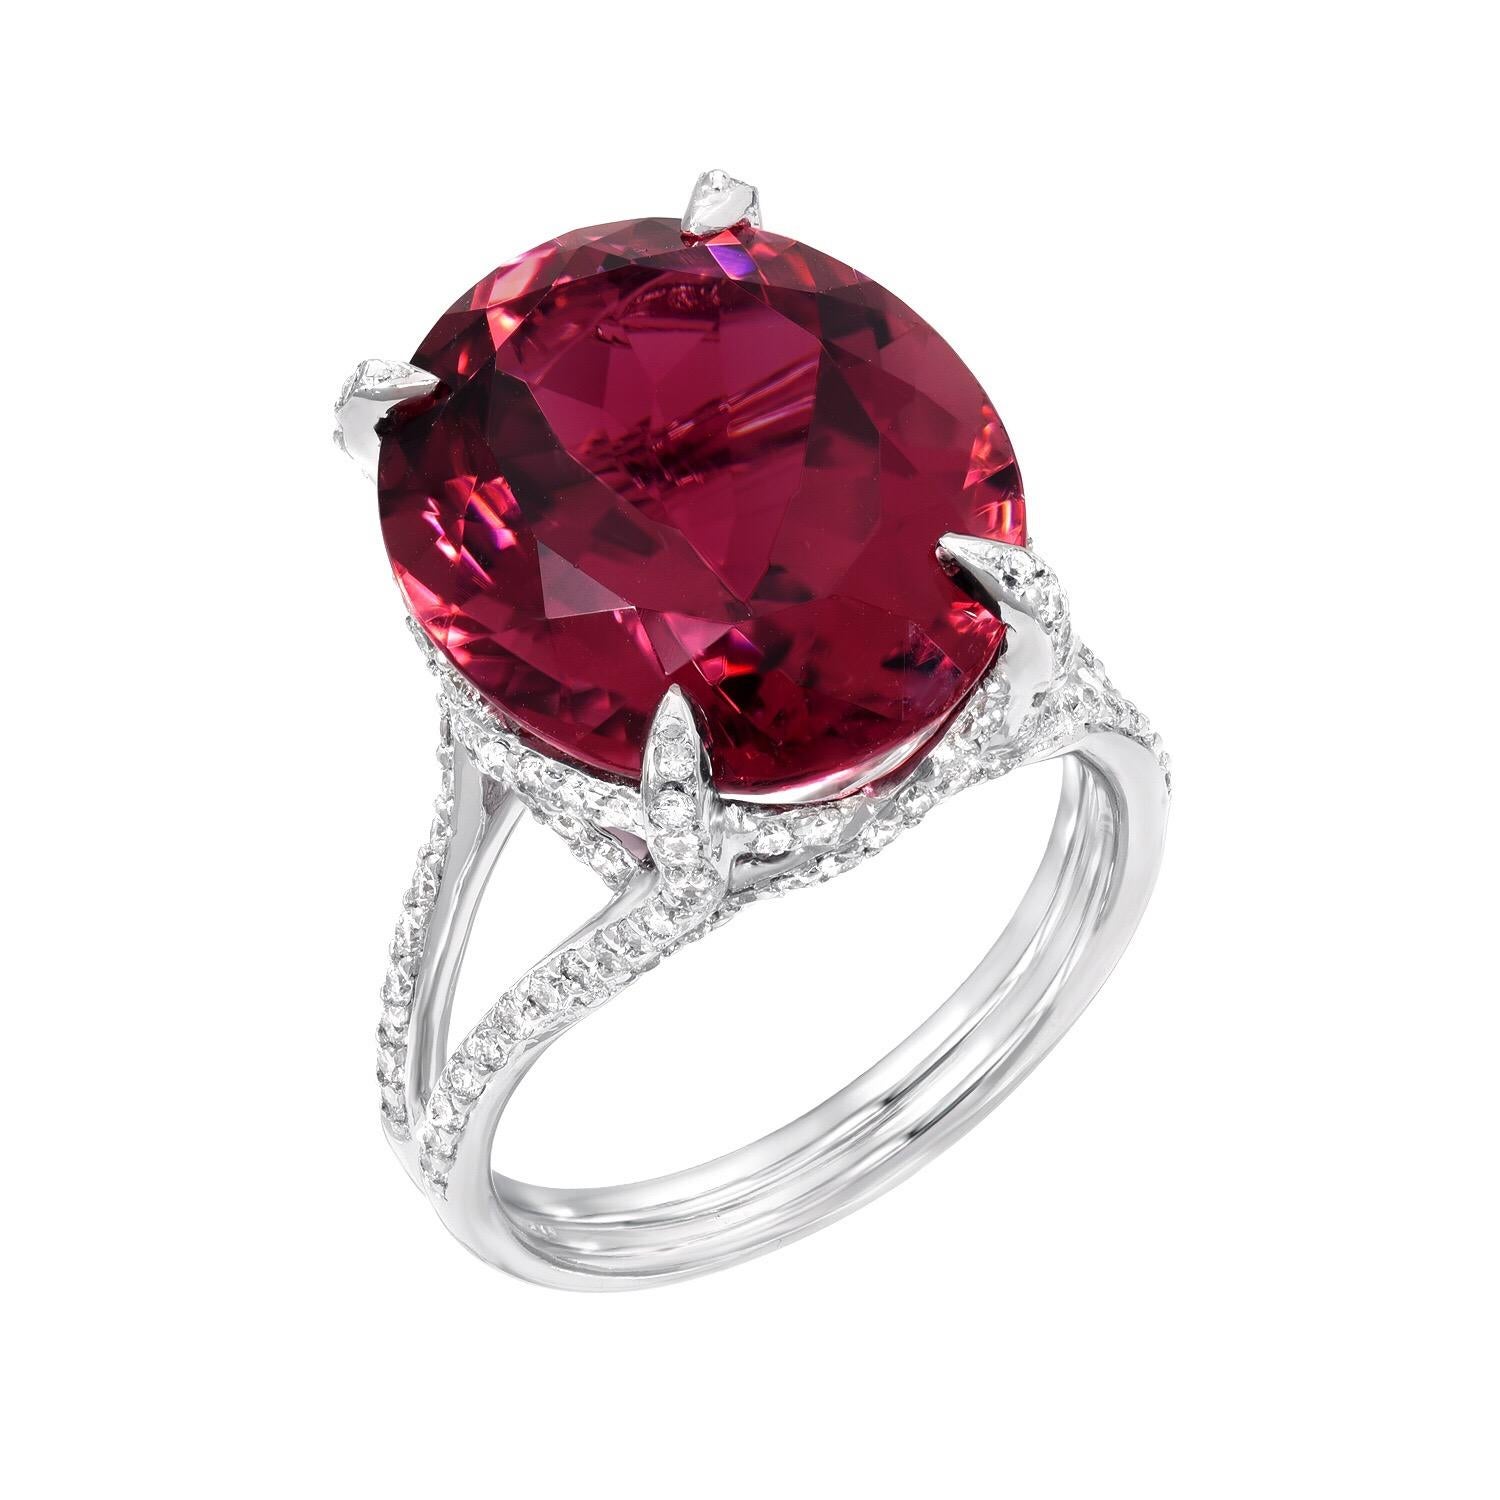 Remarkable Rubelite Tourmaline oval, weighing a total of 11.90 carats, is adorned by a total of 0.88 carats of micro pave diamonds, in this 18K white gold ring.
Size 6.5. Resizing is complimentary upon request.
Returns are accepted and paid by us